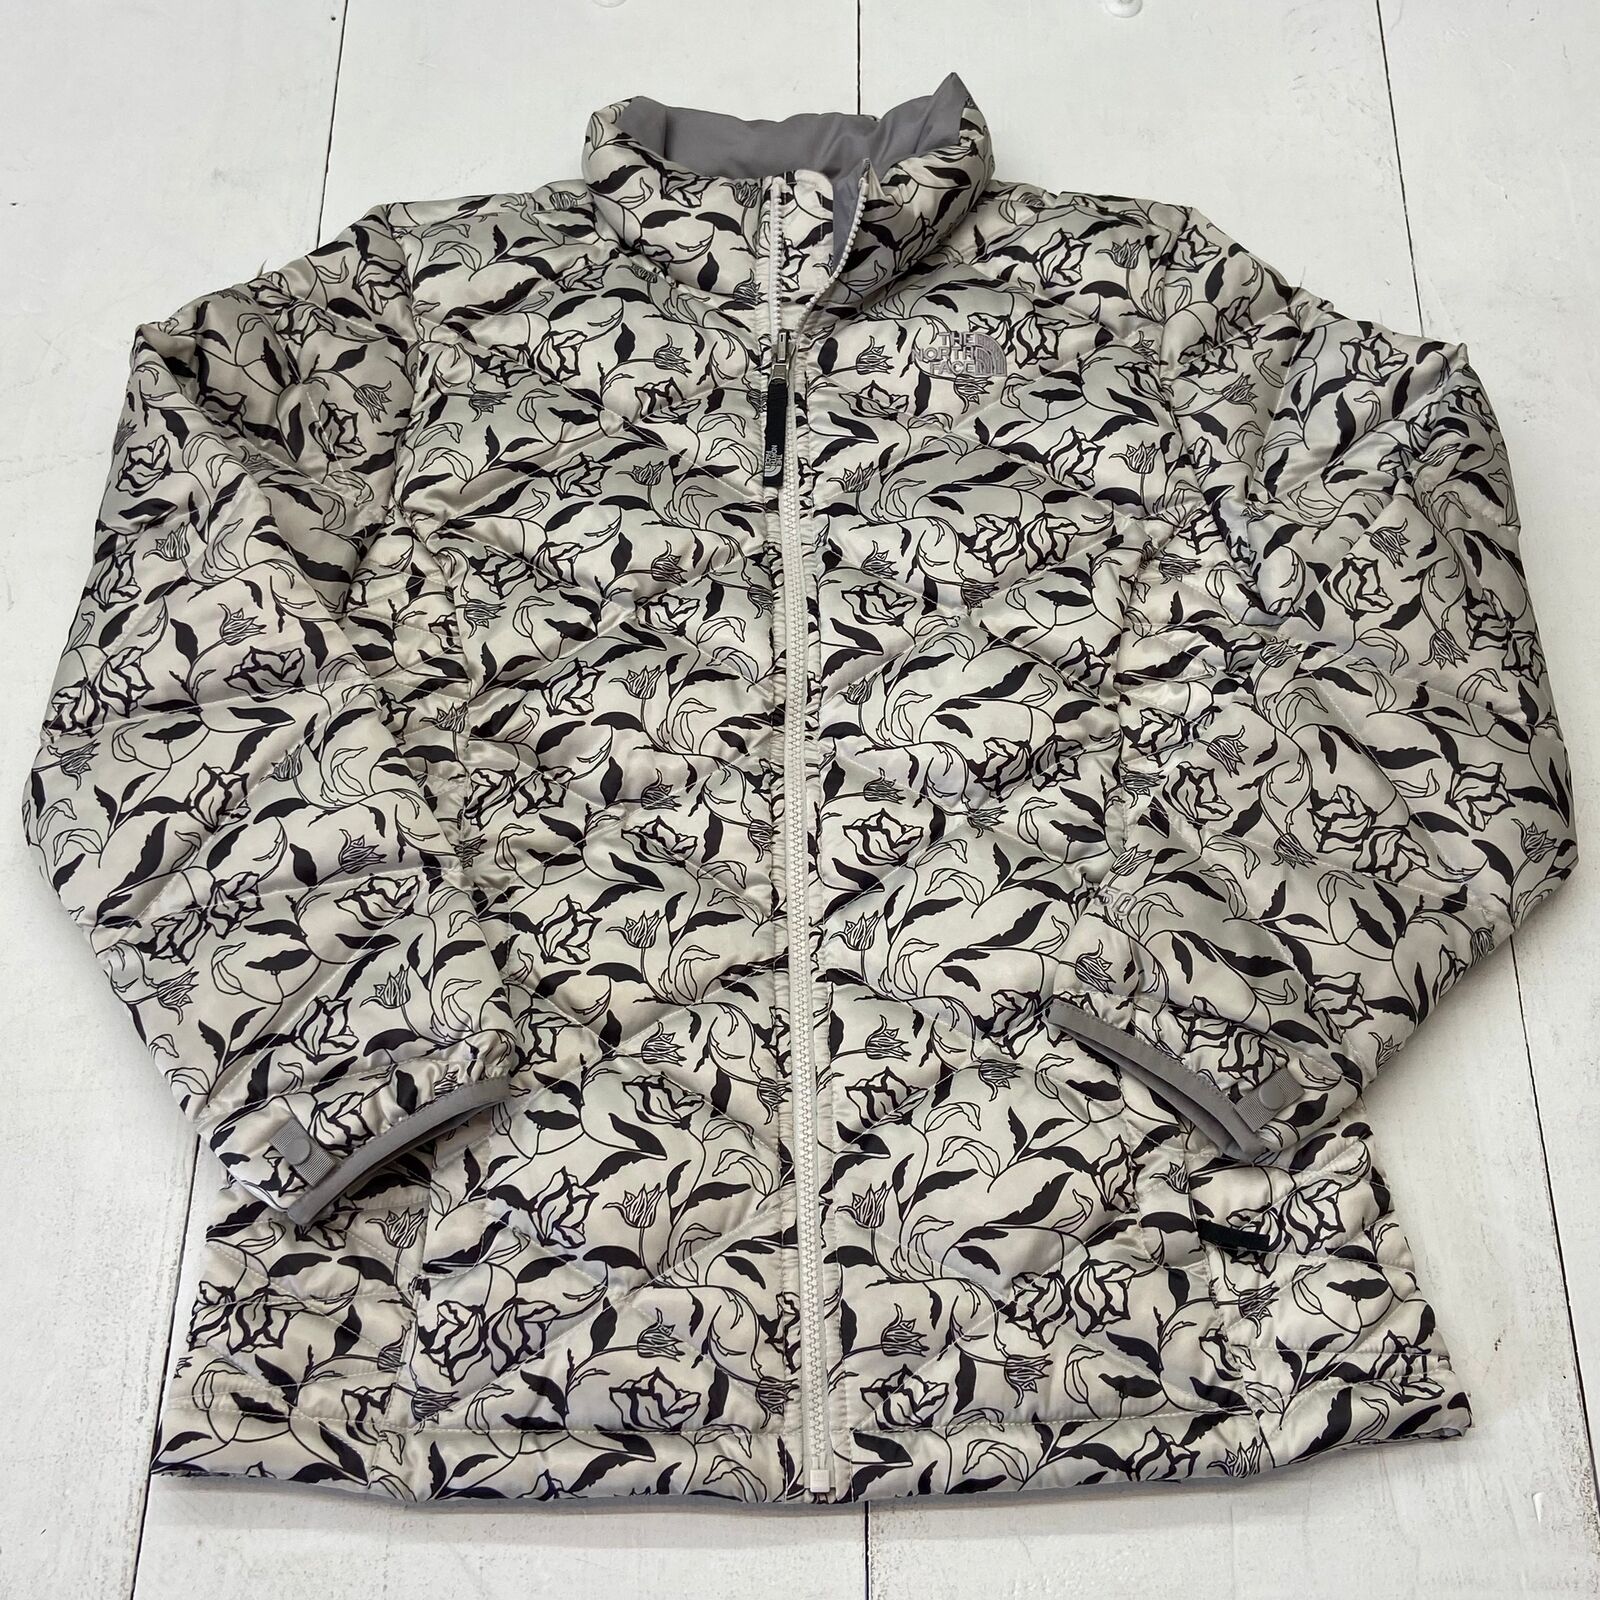 North Face Black White Floral Print Zip Up Jacket Youth Girls Size XL 18